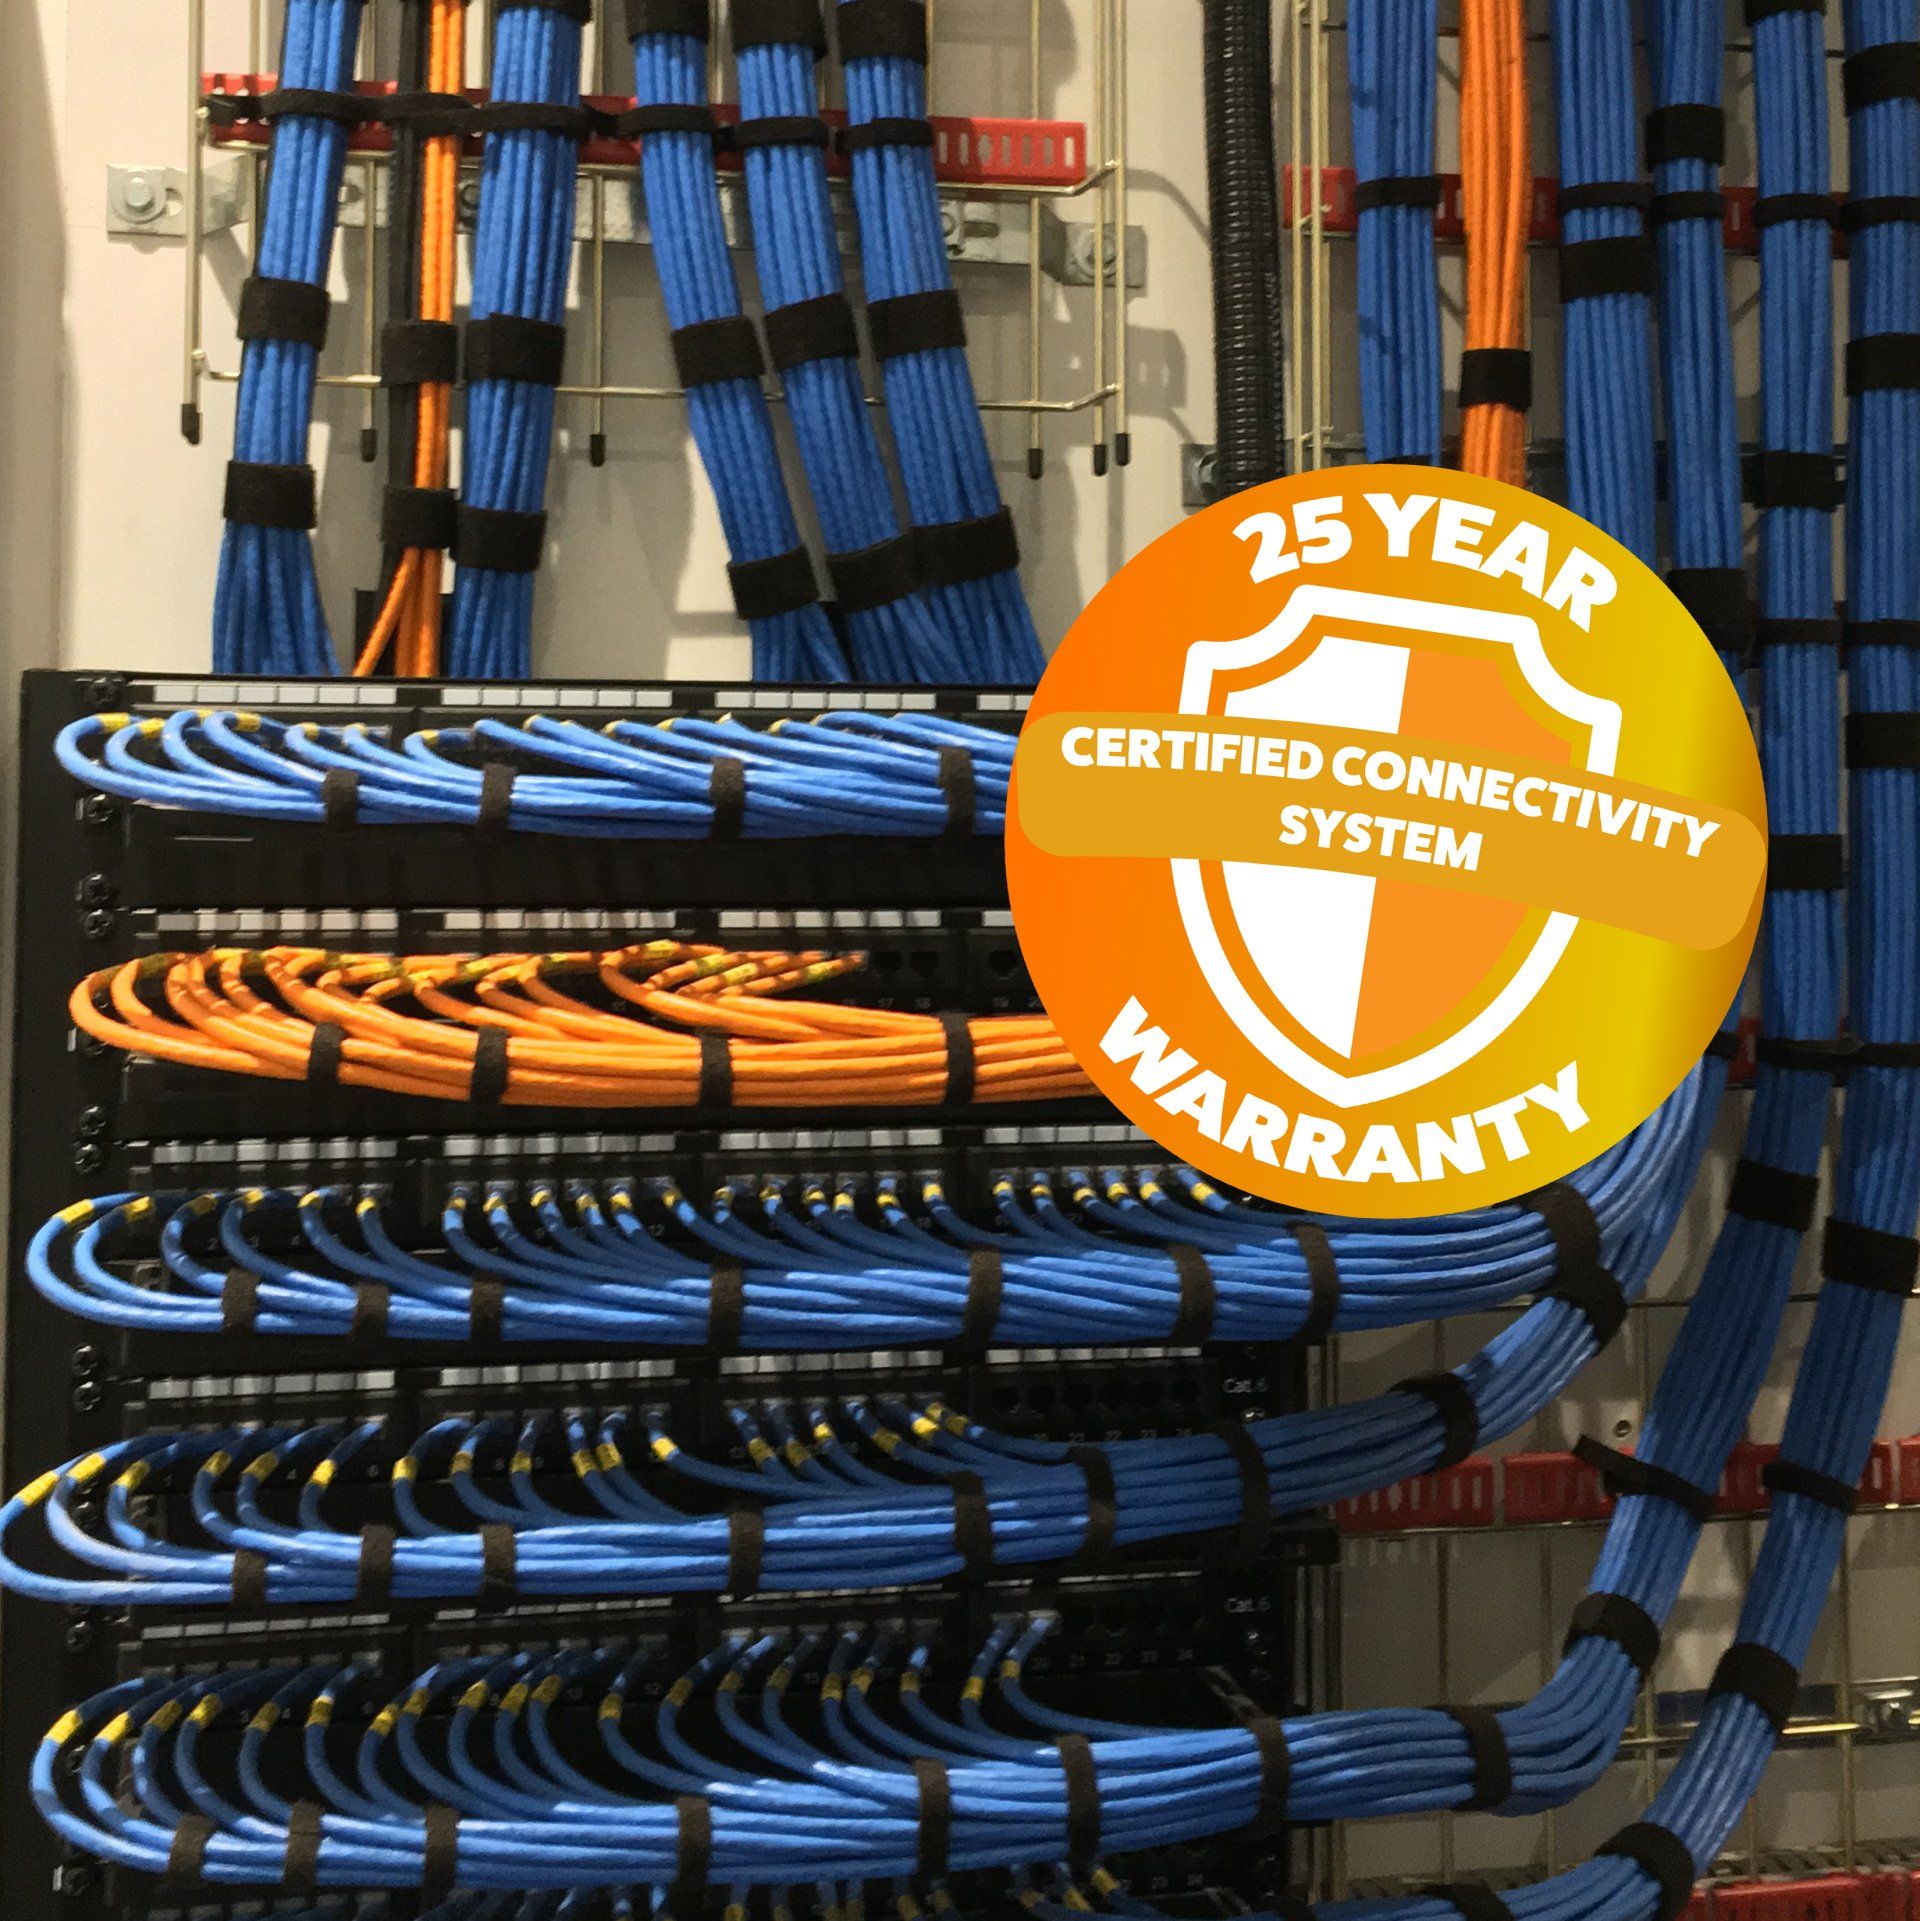 Photograph of patch panel and 25-year warranty badge